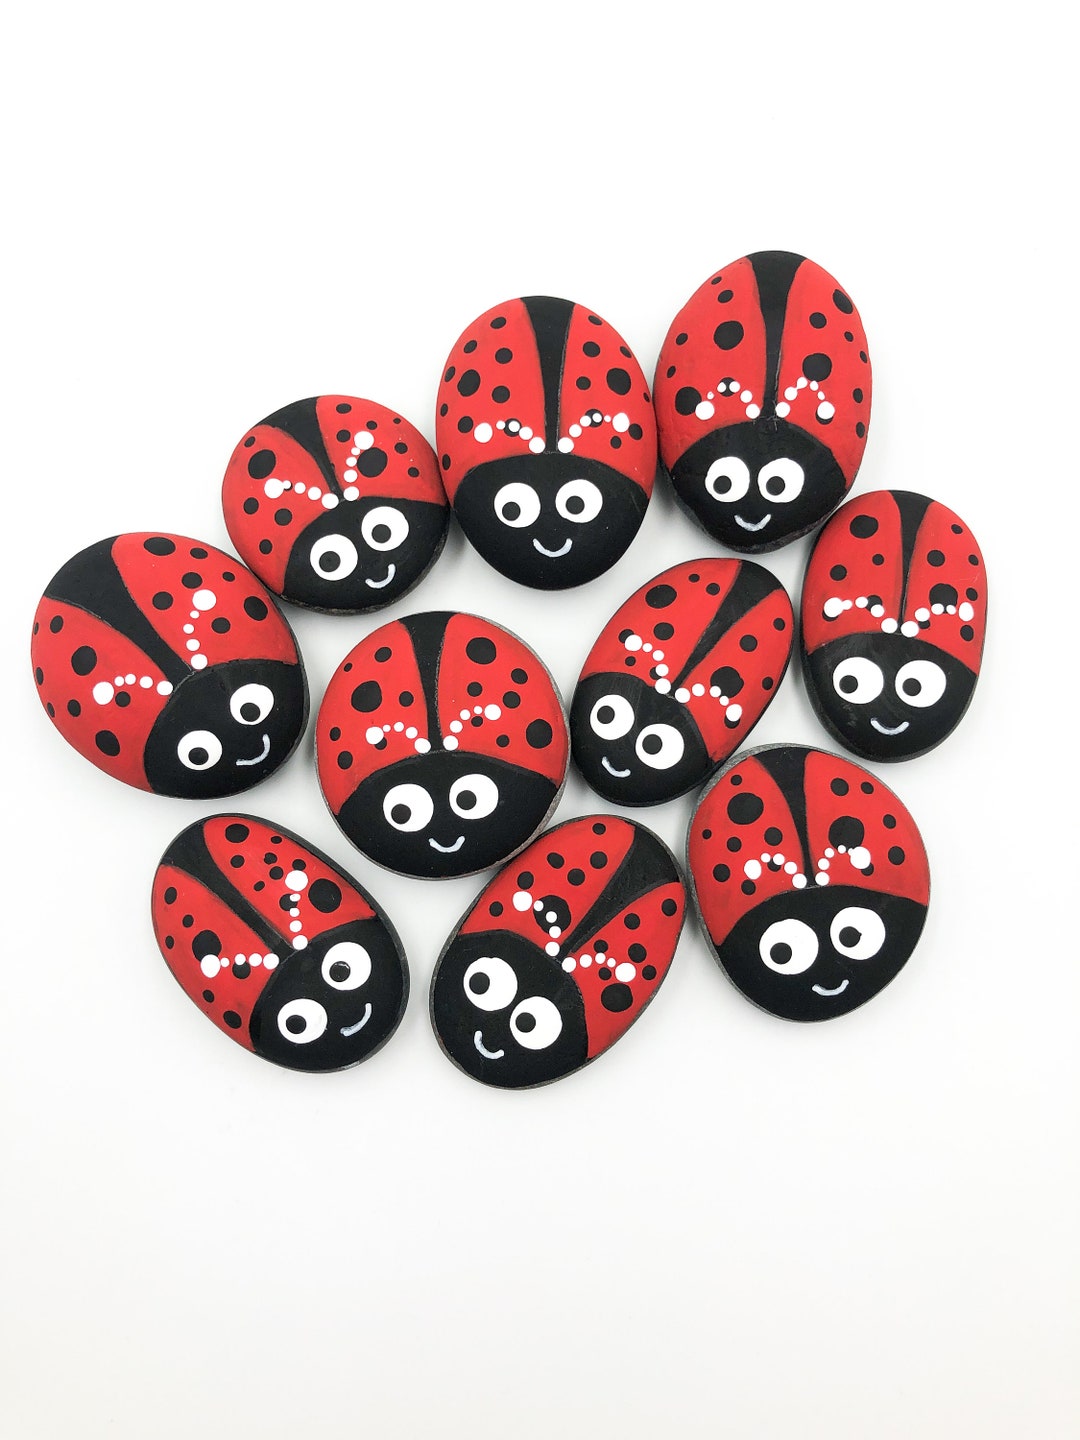 Mini Salt and Pepper Shakers Hand Painted With Cute Ladybugs Sure to Bring  You Joy. Makes Great Gift Idea for Friends and Family. 